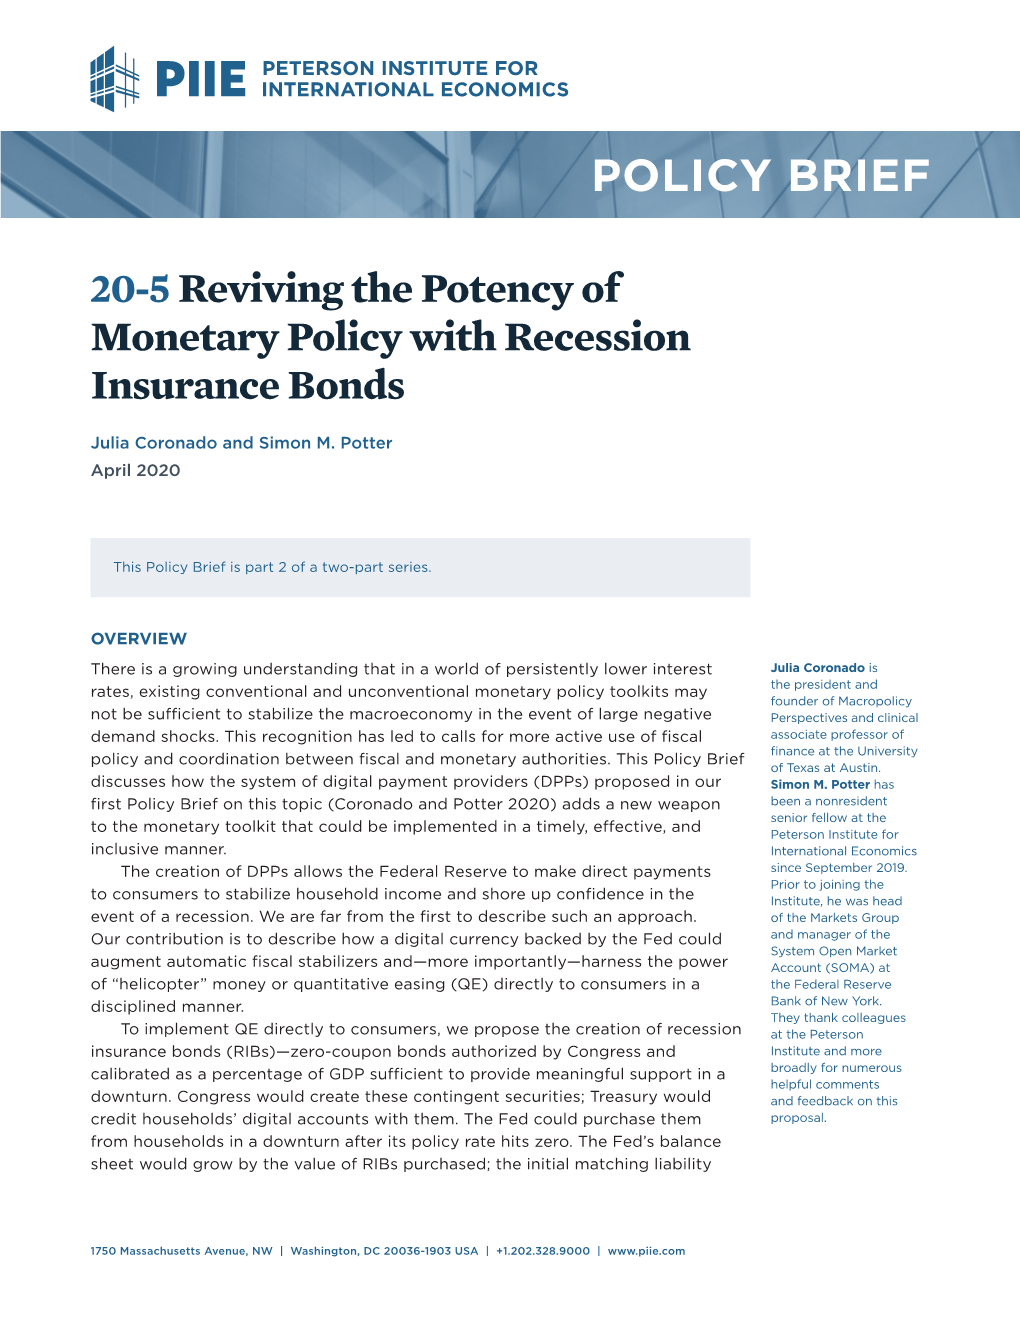 Reviving the Potency of Monetary Policy with Recession Insurance Bonds